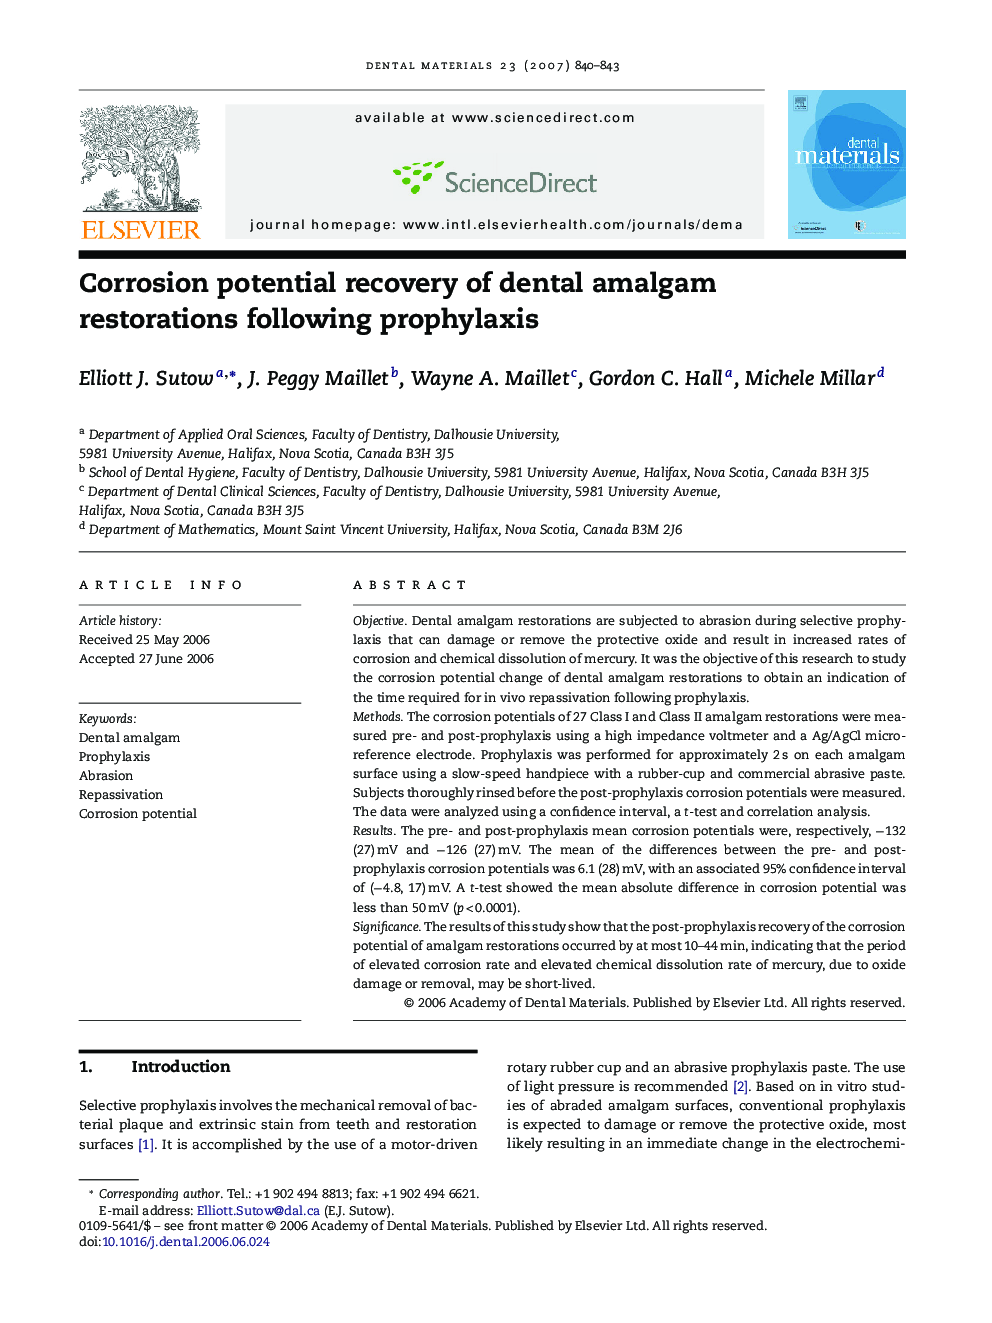 Corrosion potential recovery of dental amalgam restorations following prophylaxis